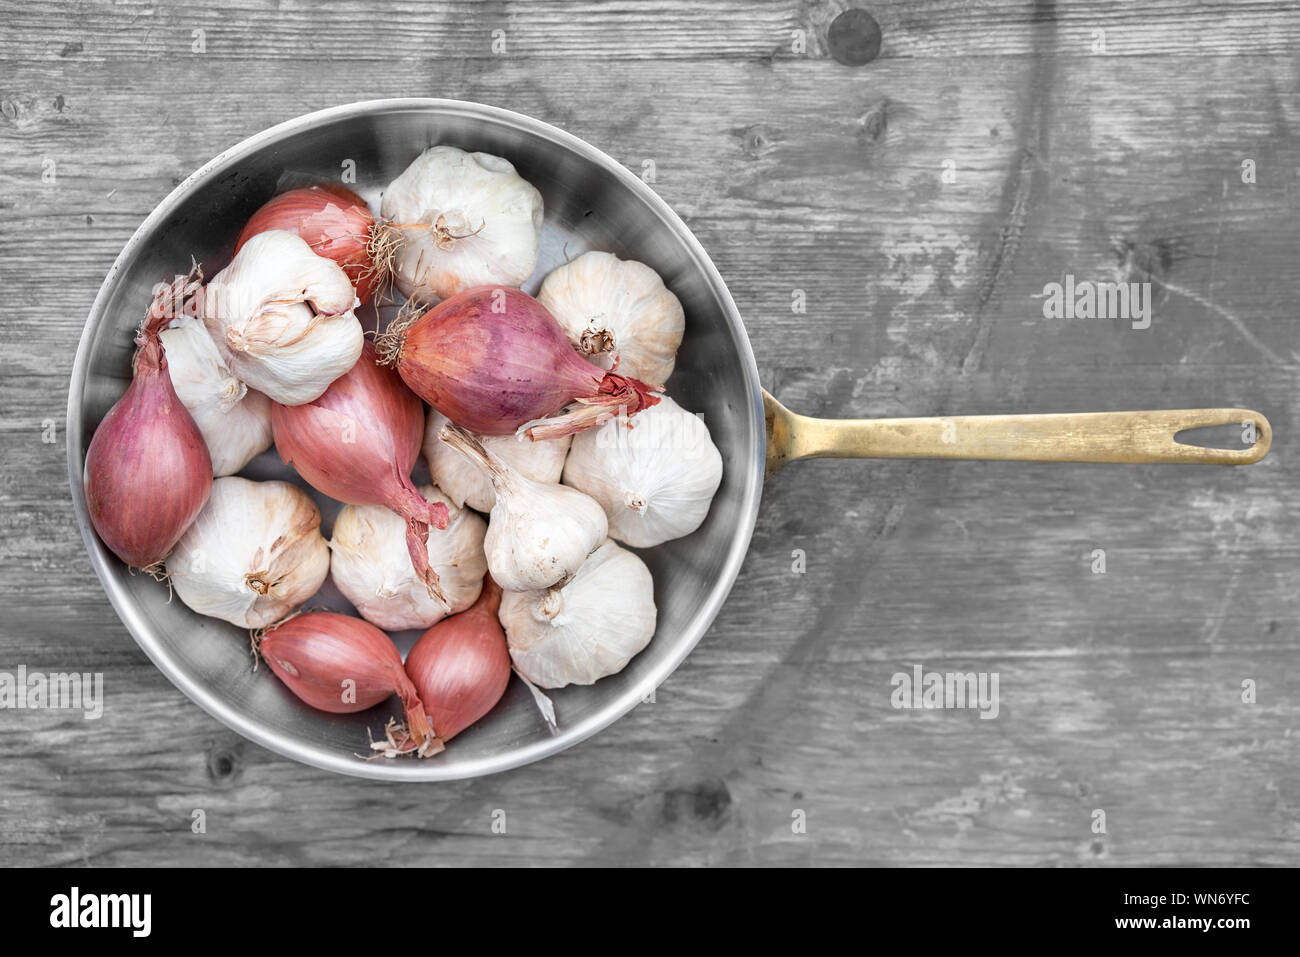 Directly Above View Of Onions And Garlic Cloves In Cooking Utensil On Table Stock Photo